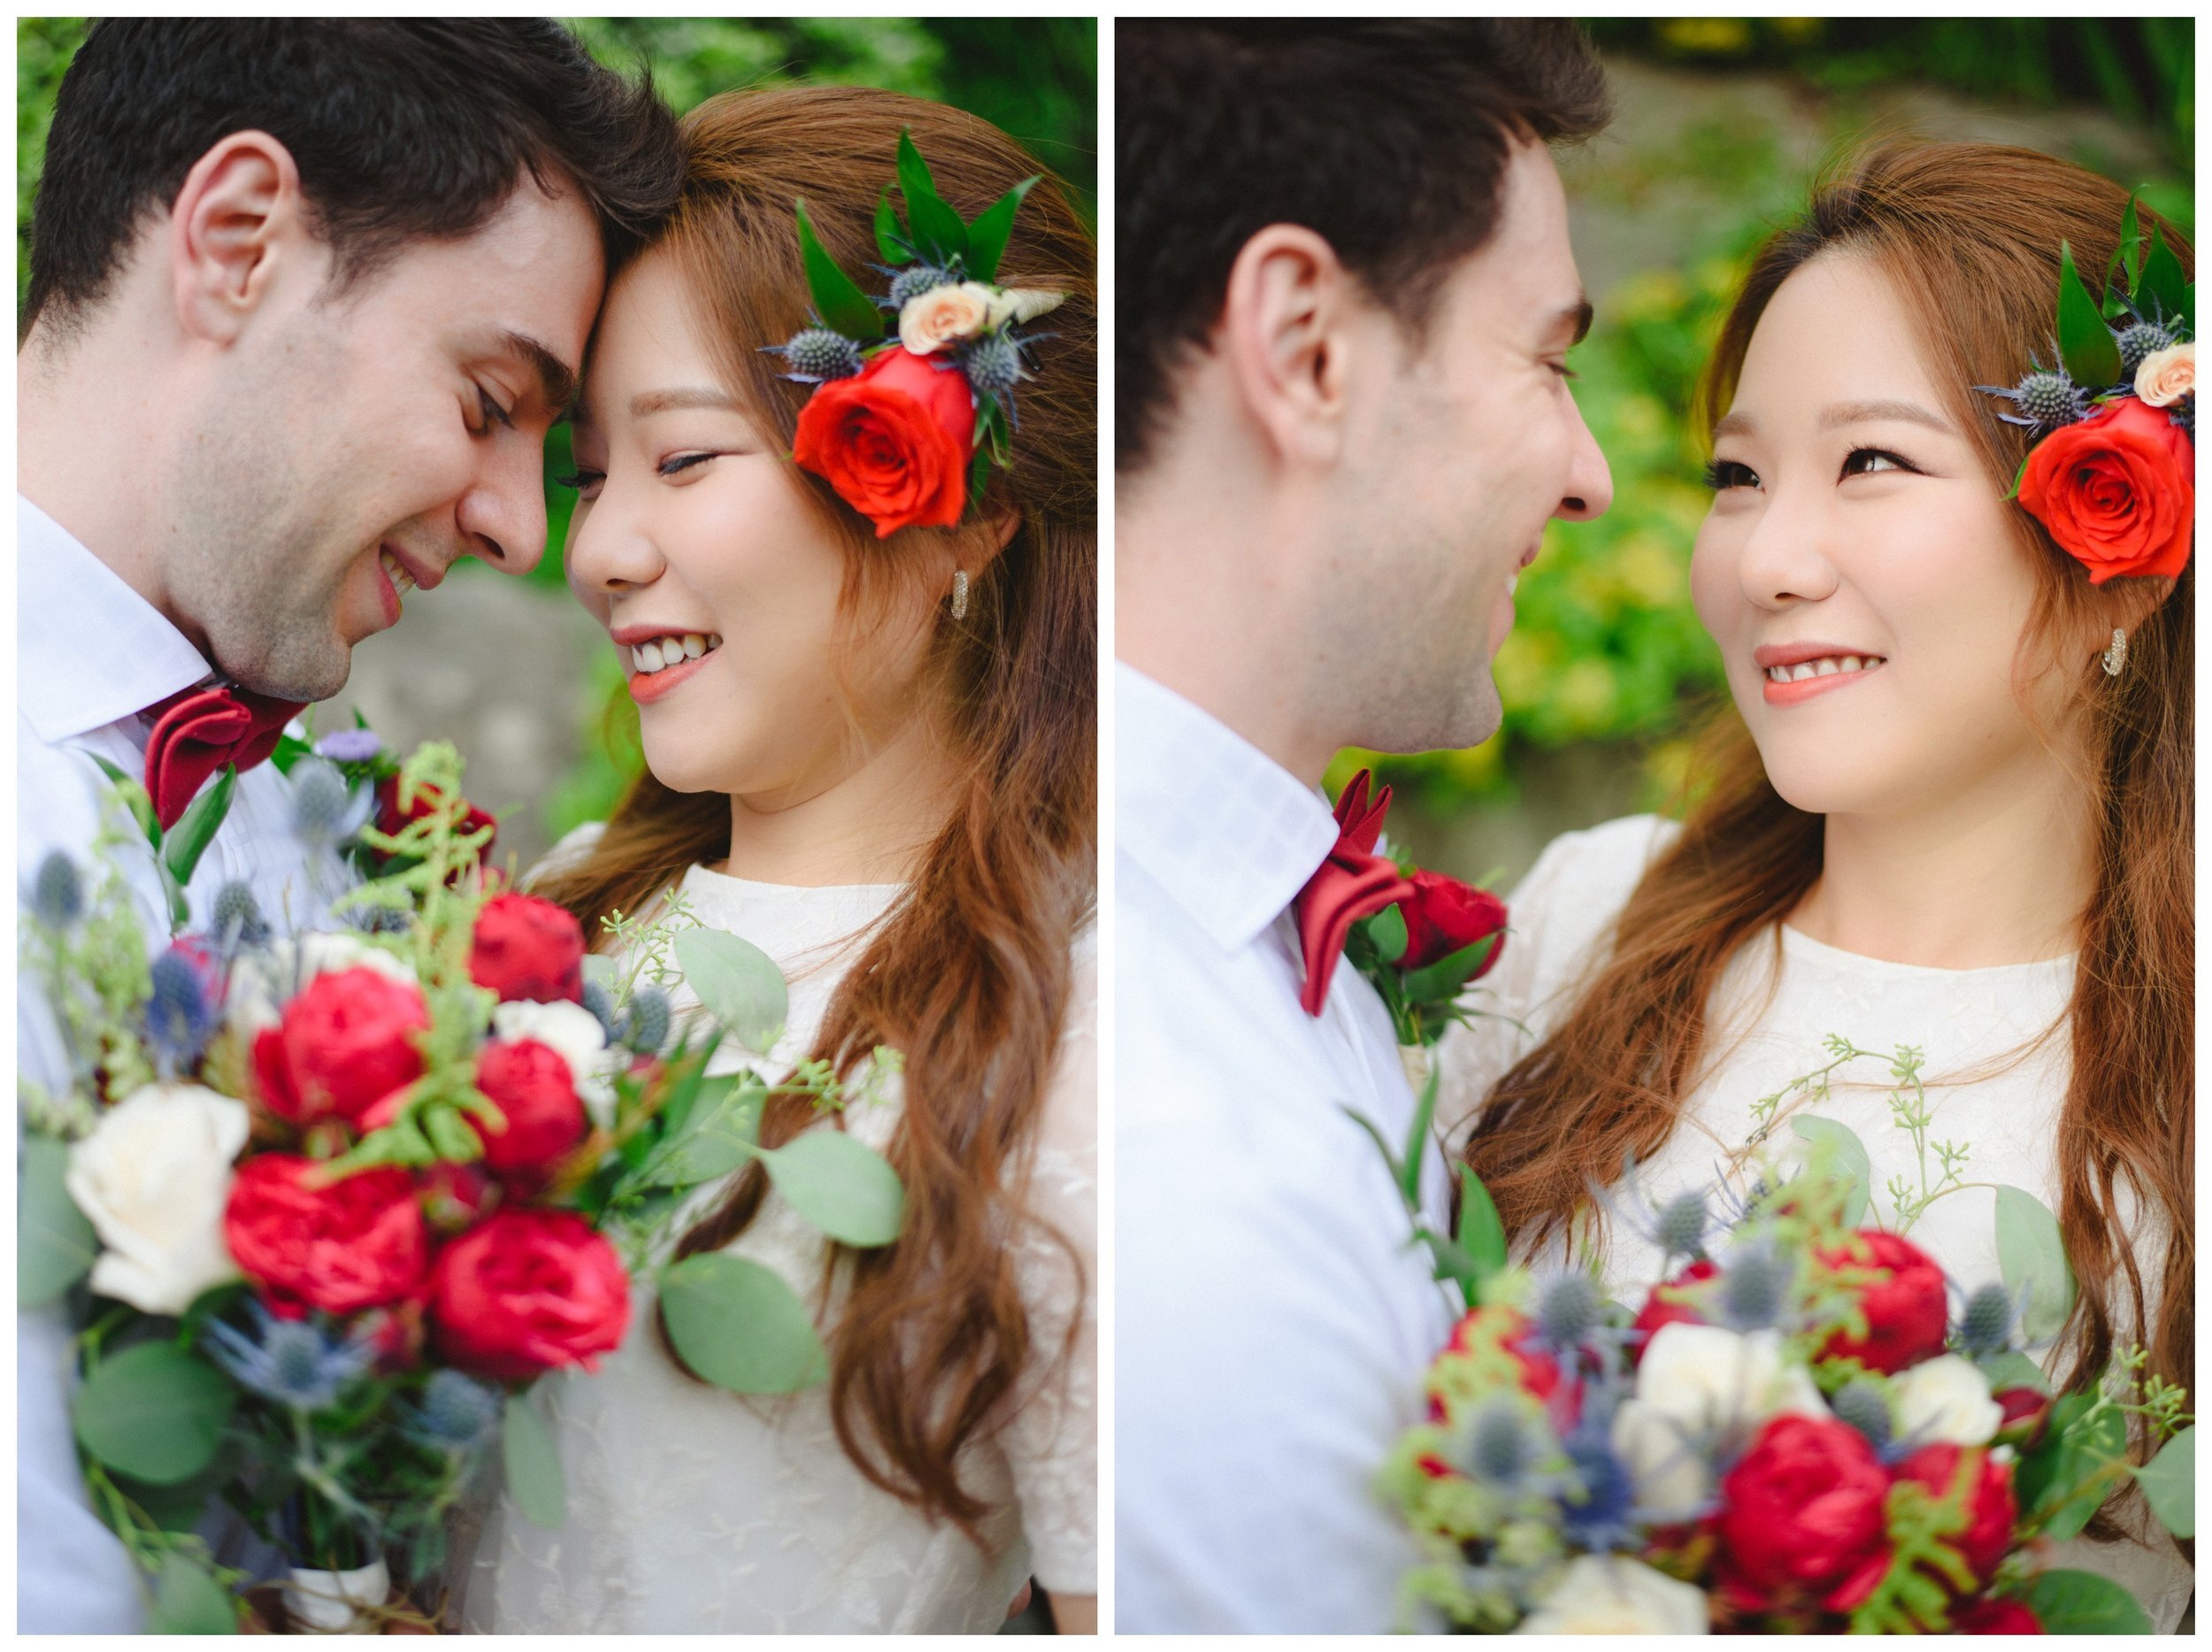 Couple with bright red flowers Edward Garden engagement session 